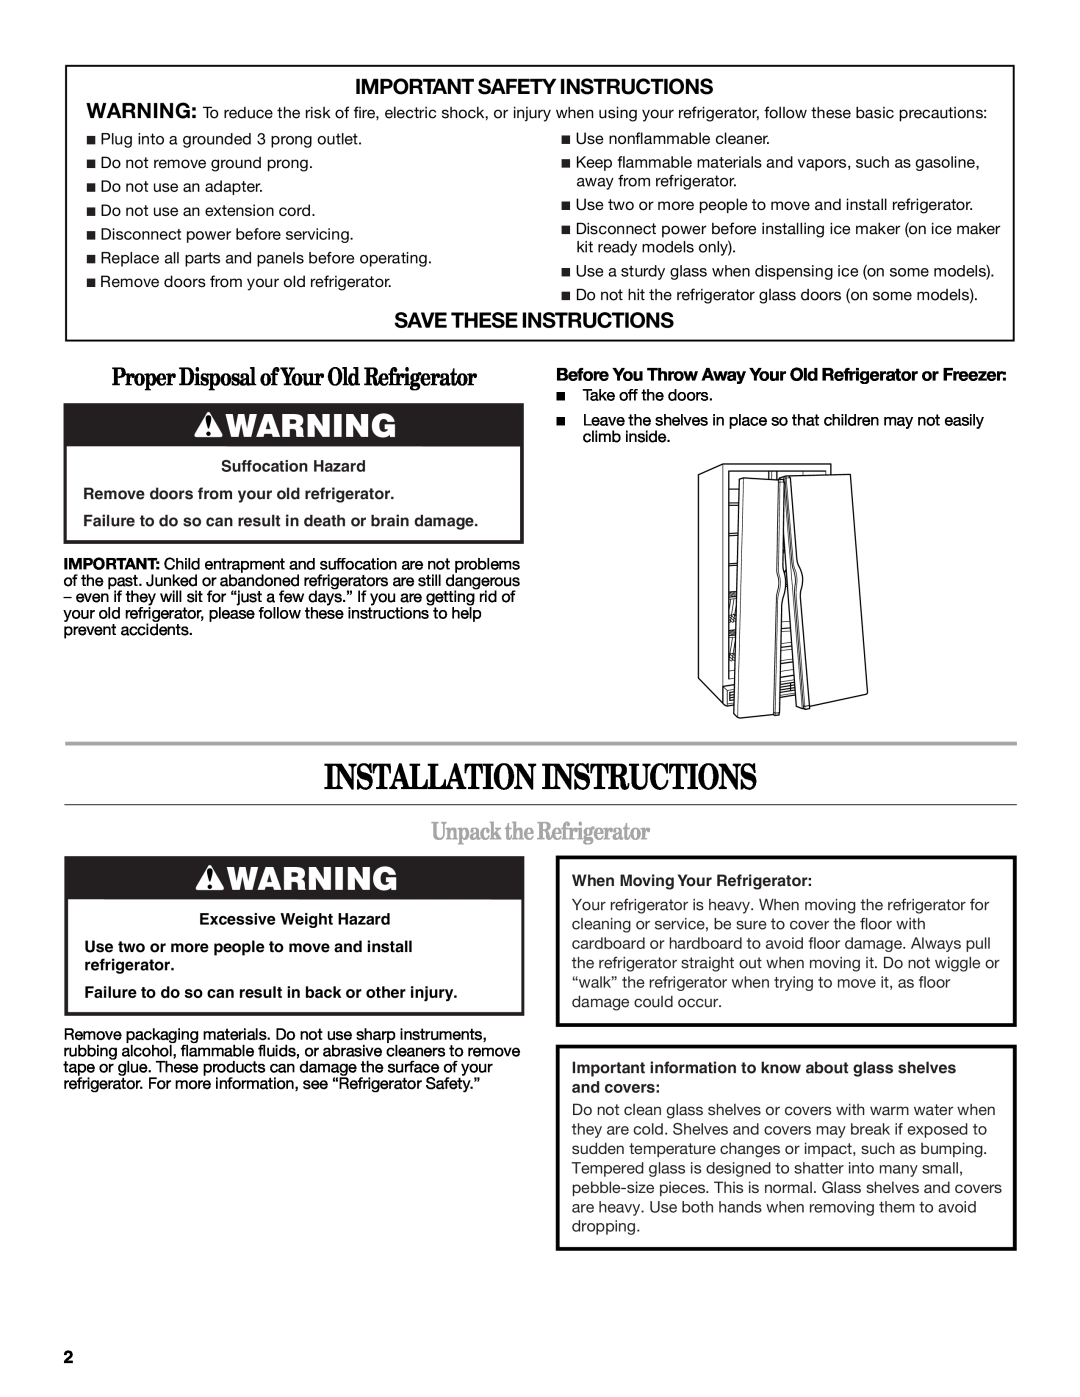 Amana W10316638A Installation Instructions, Unpack the Refrigerator, Important Safety Instructions, Suffocation Hazard 